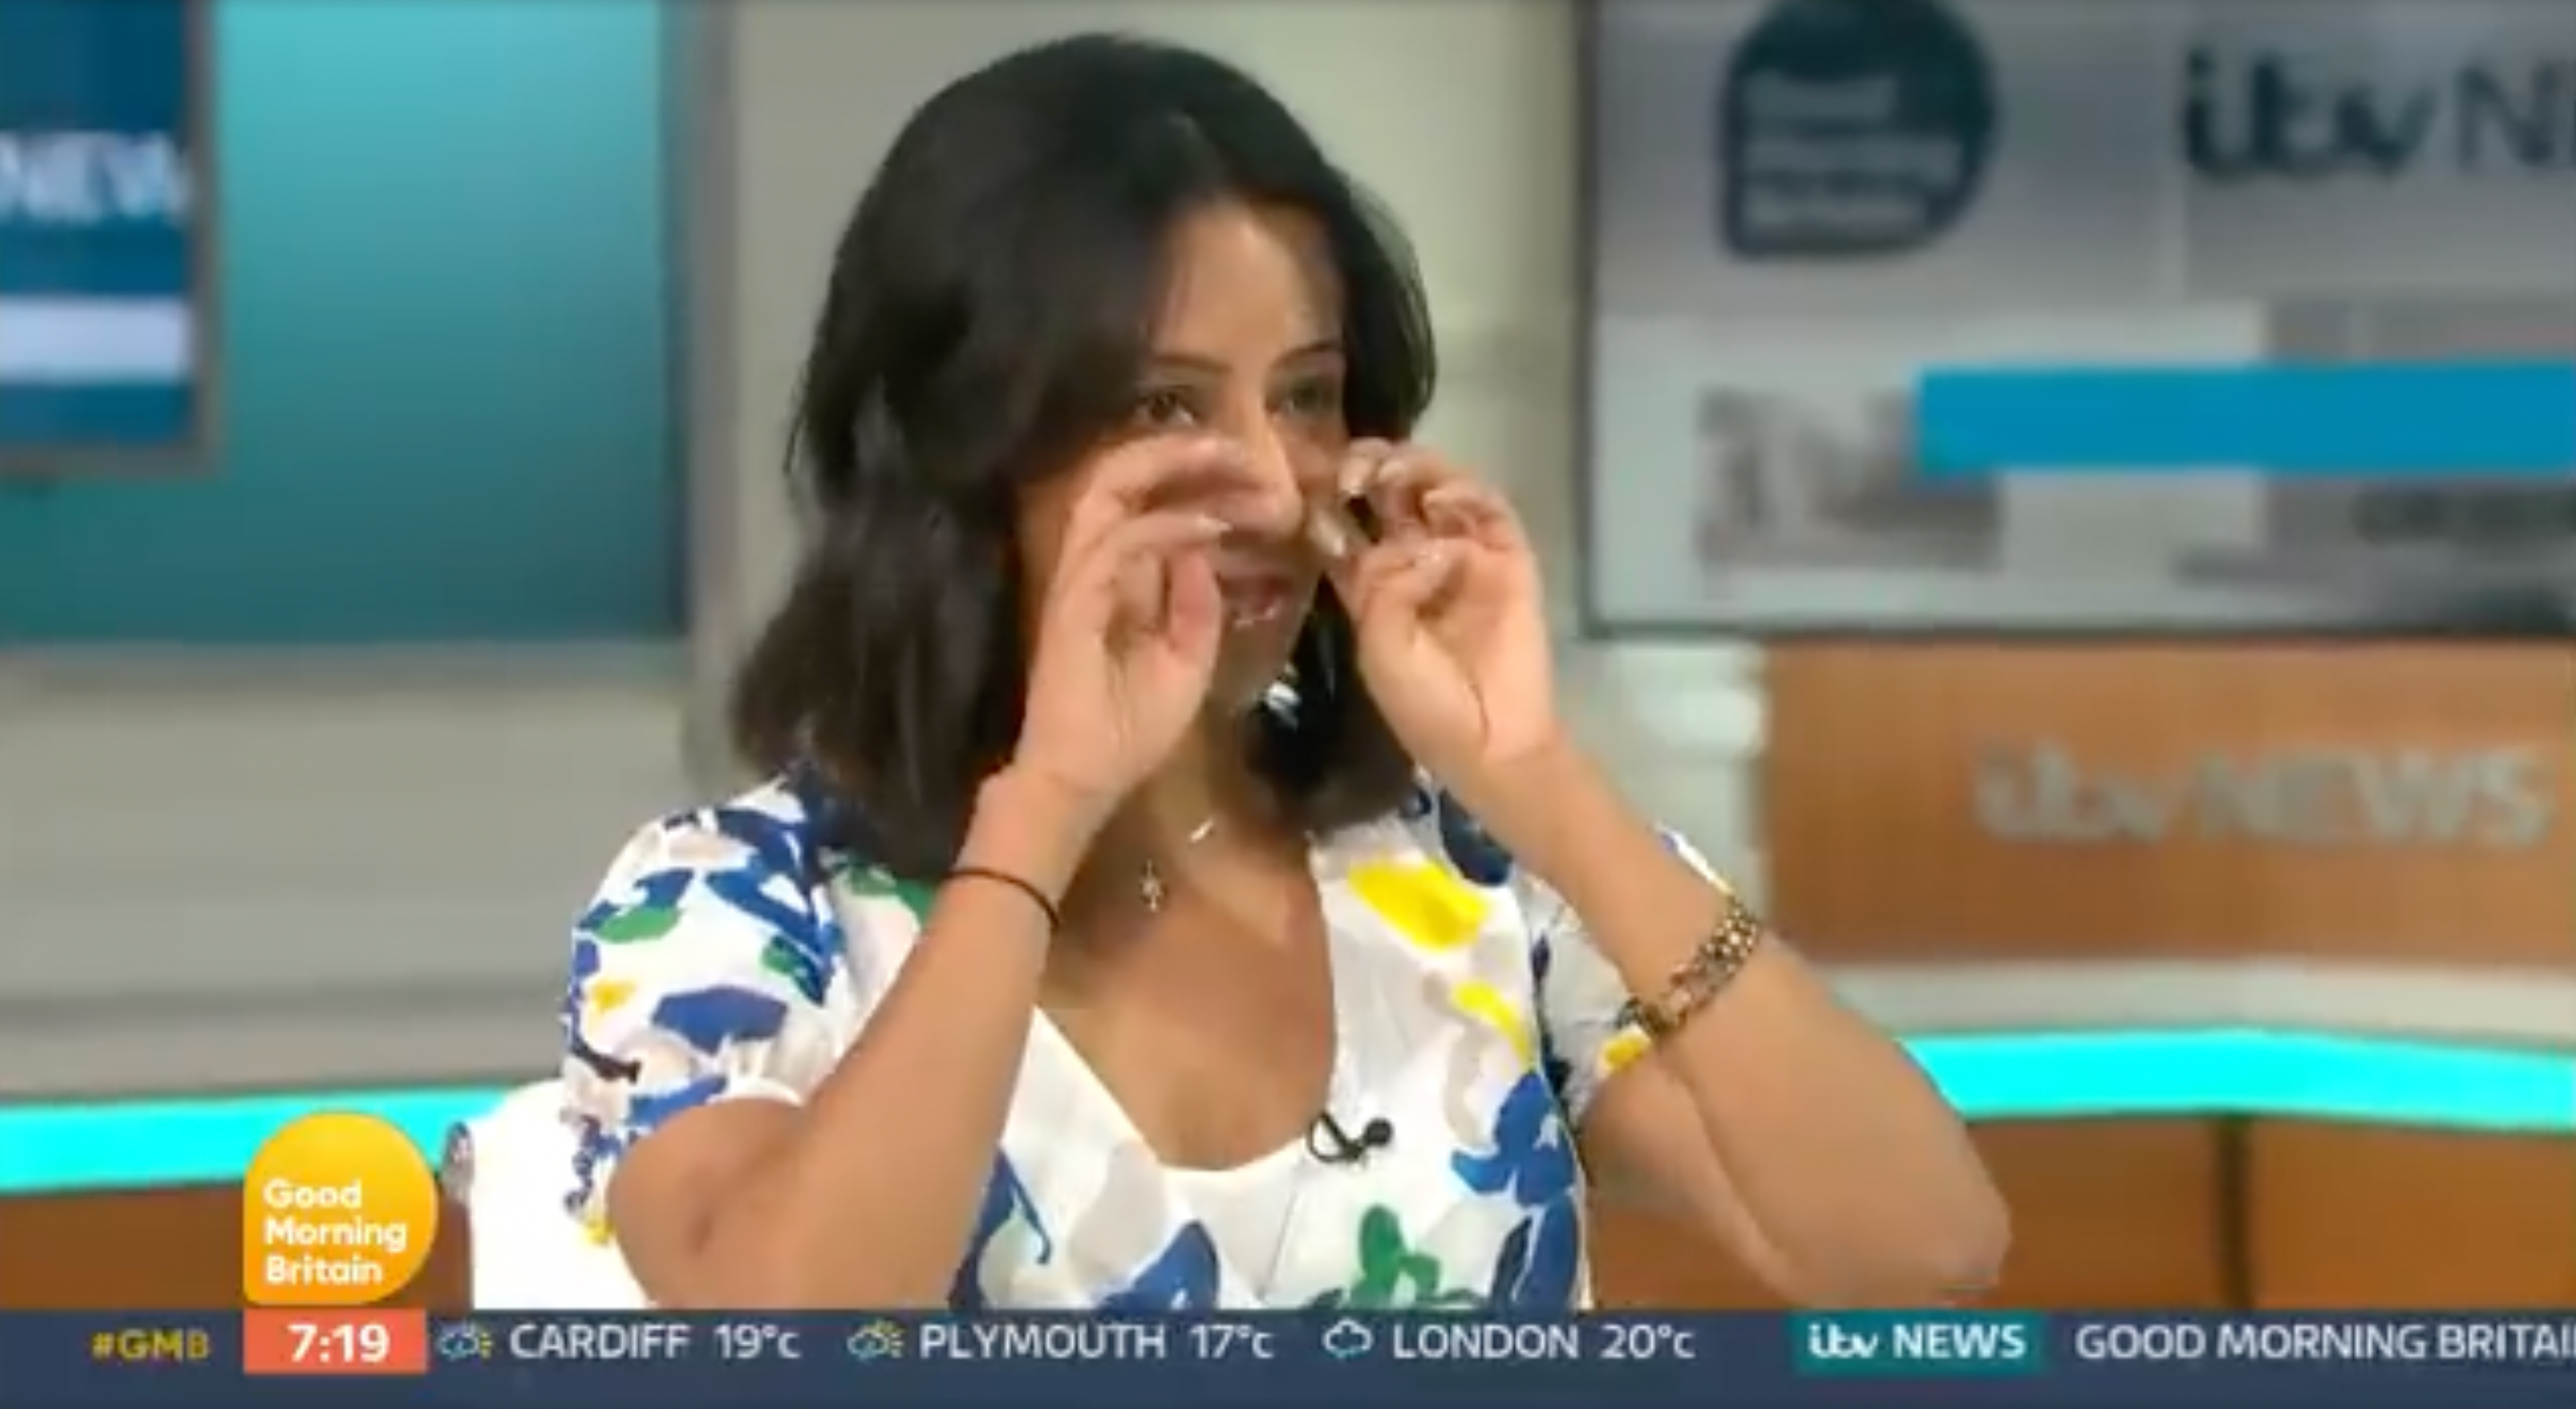 Ranvir Singh had tears in her eyes during an on-air discussion about the racism experienced by England’s black players